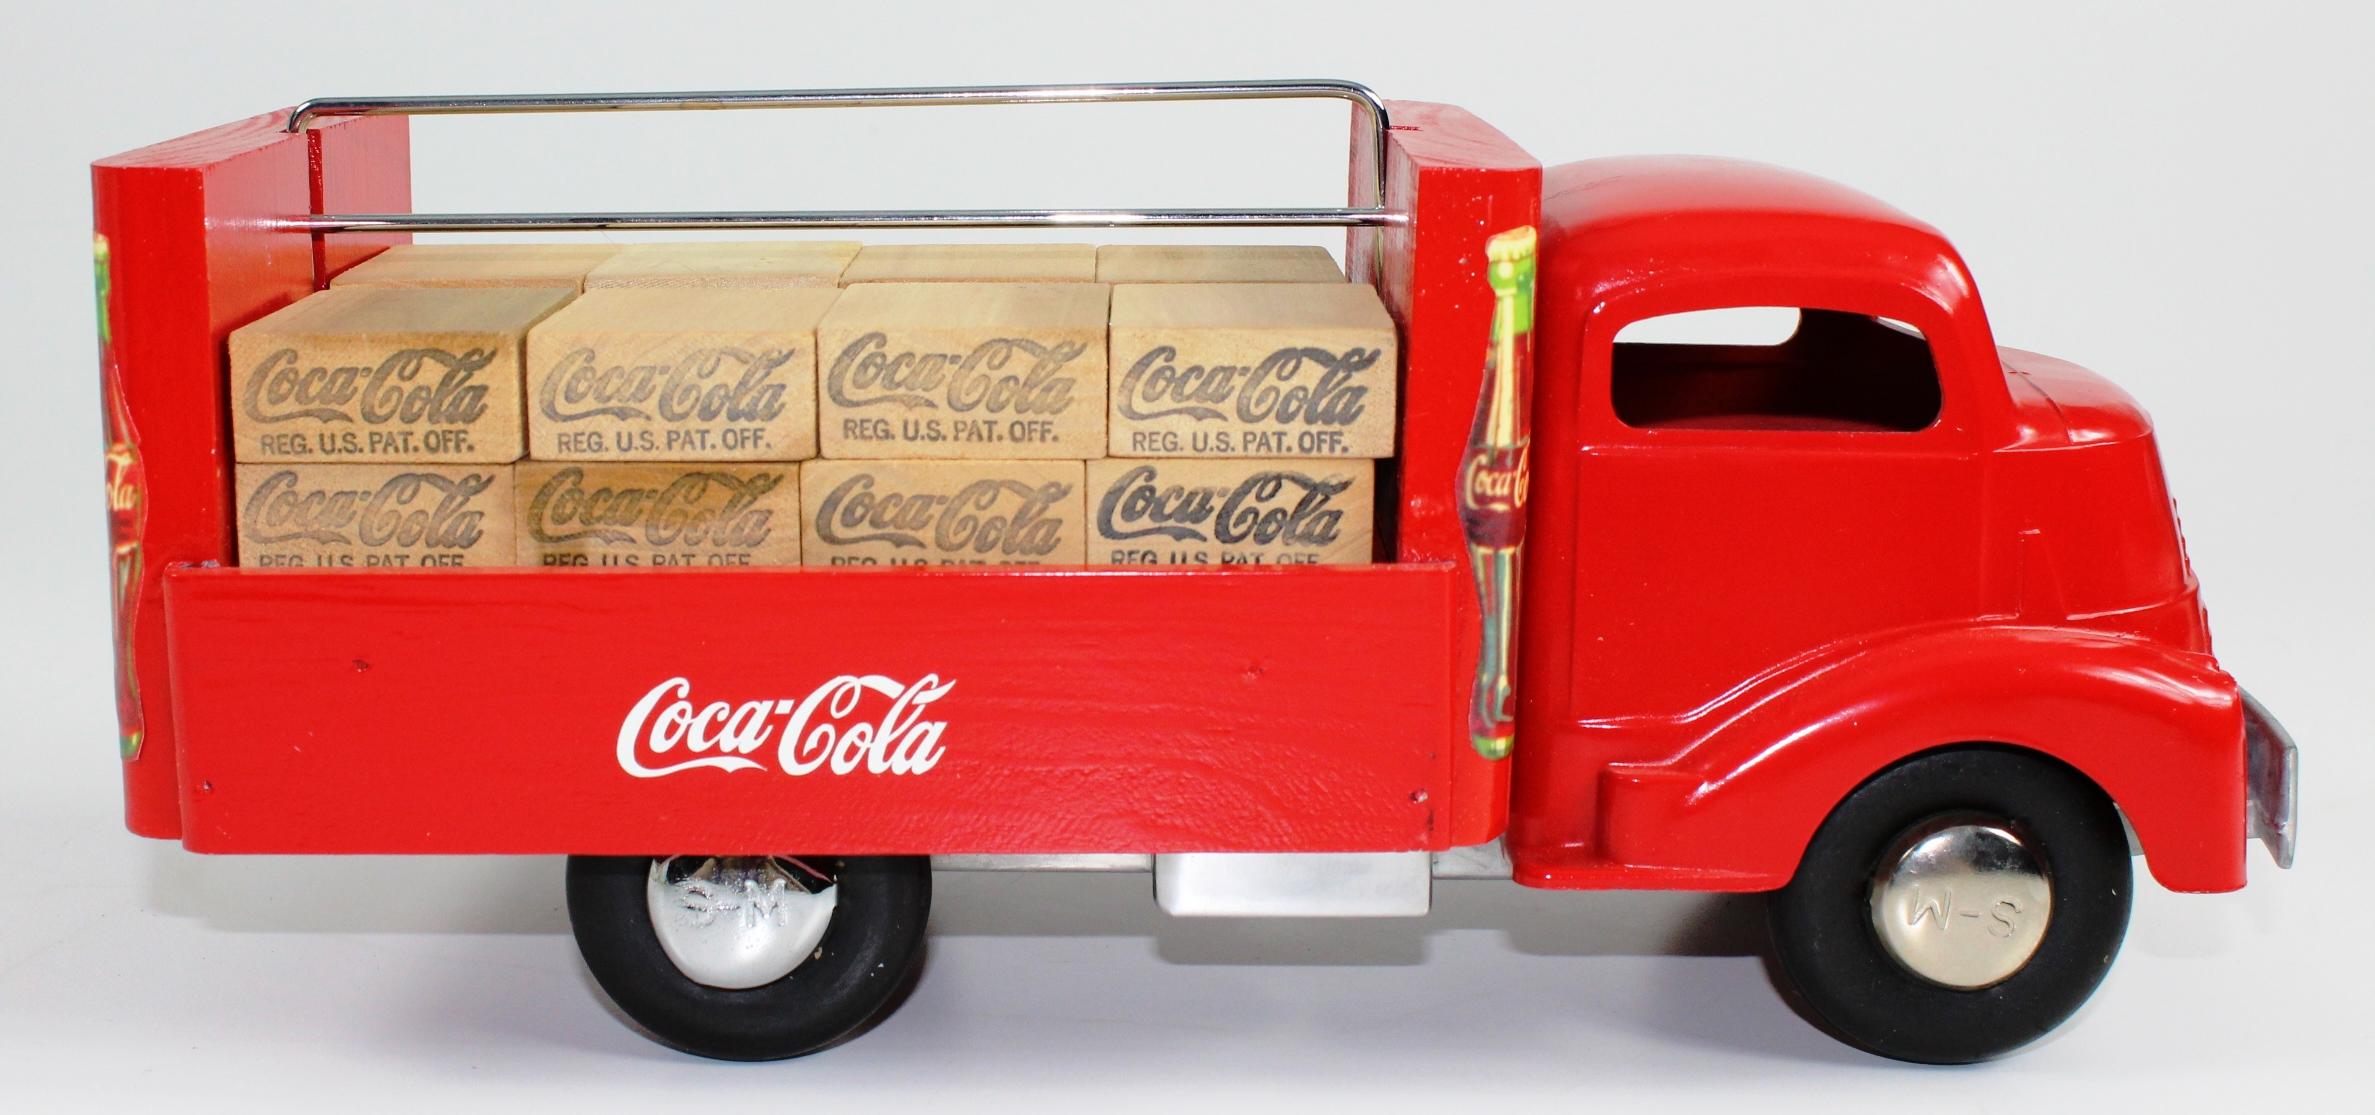 SMITH MILLER COCA COLA TRUCK WITH WOOD COKE CRATES